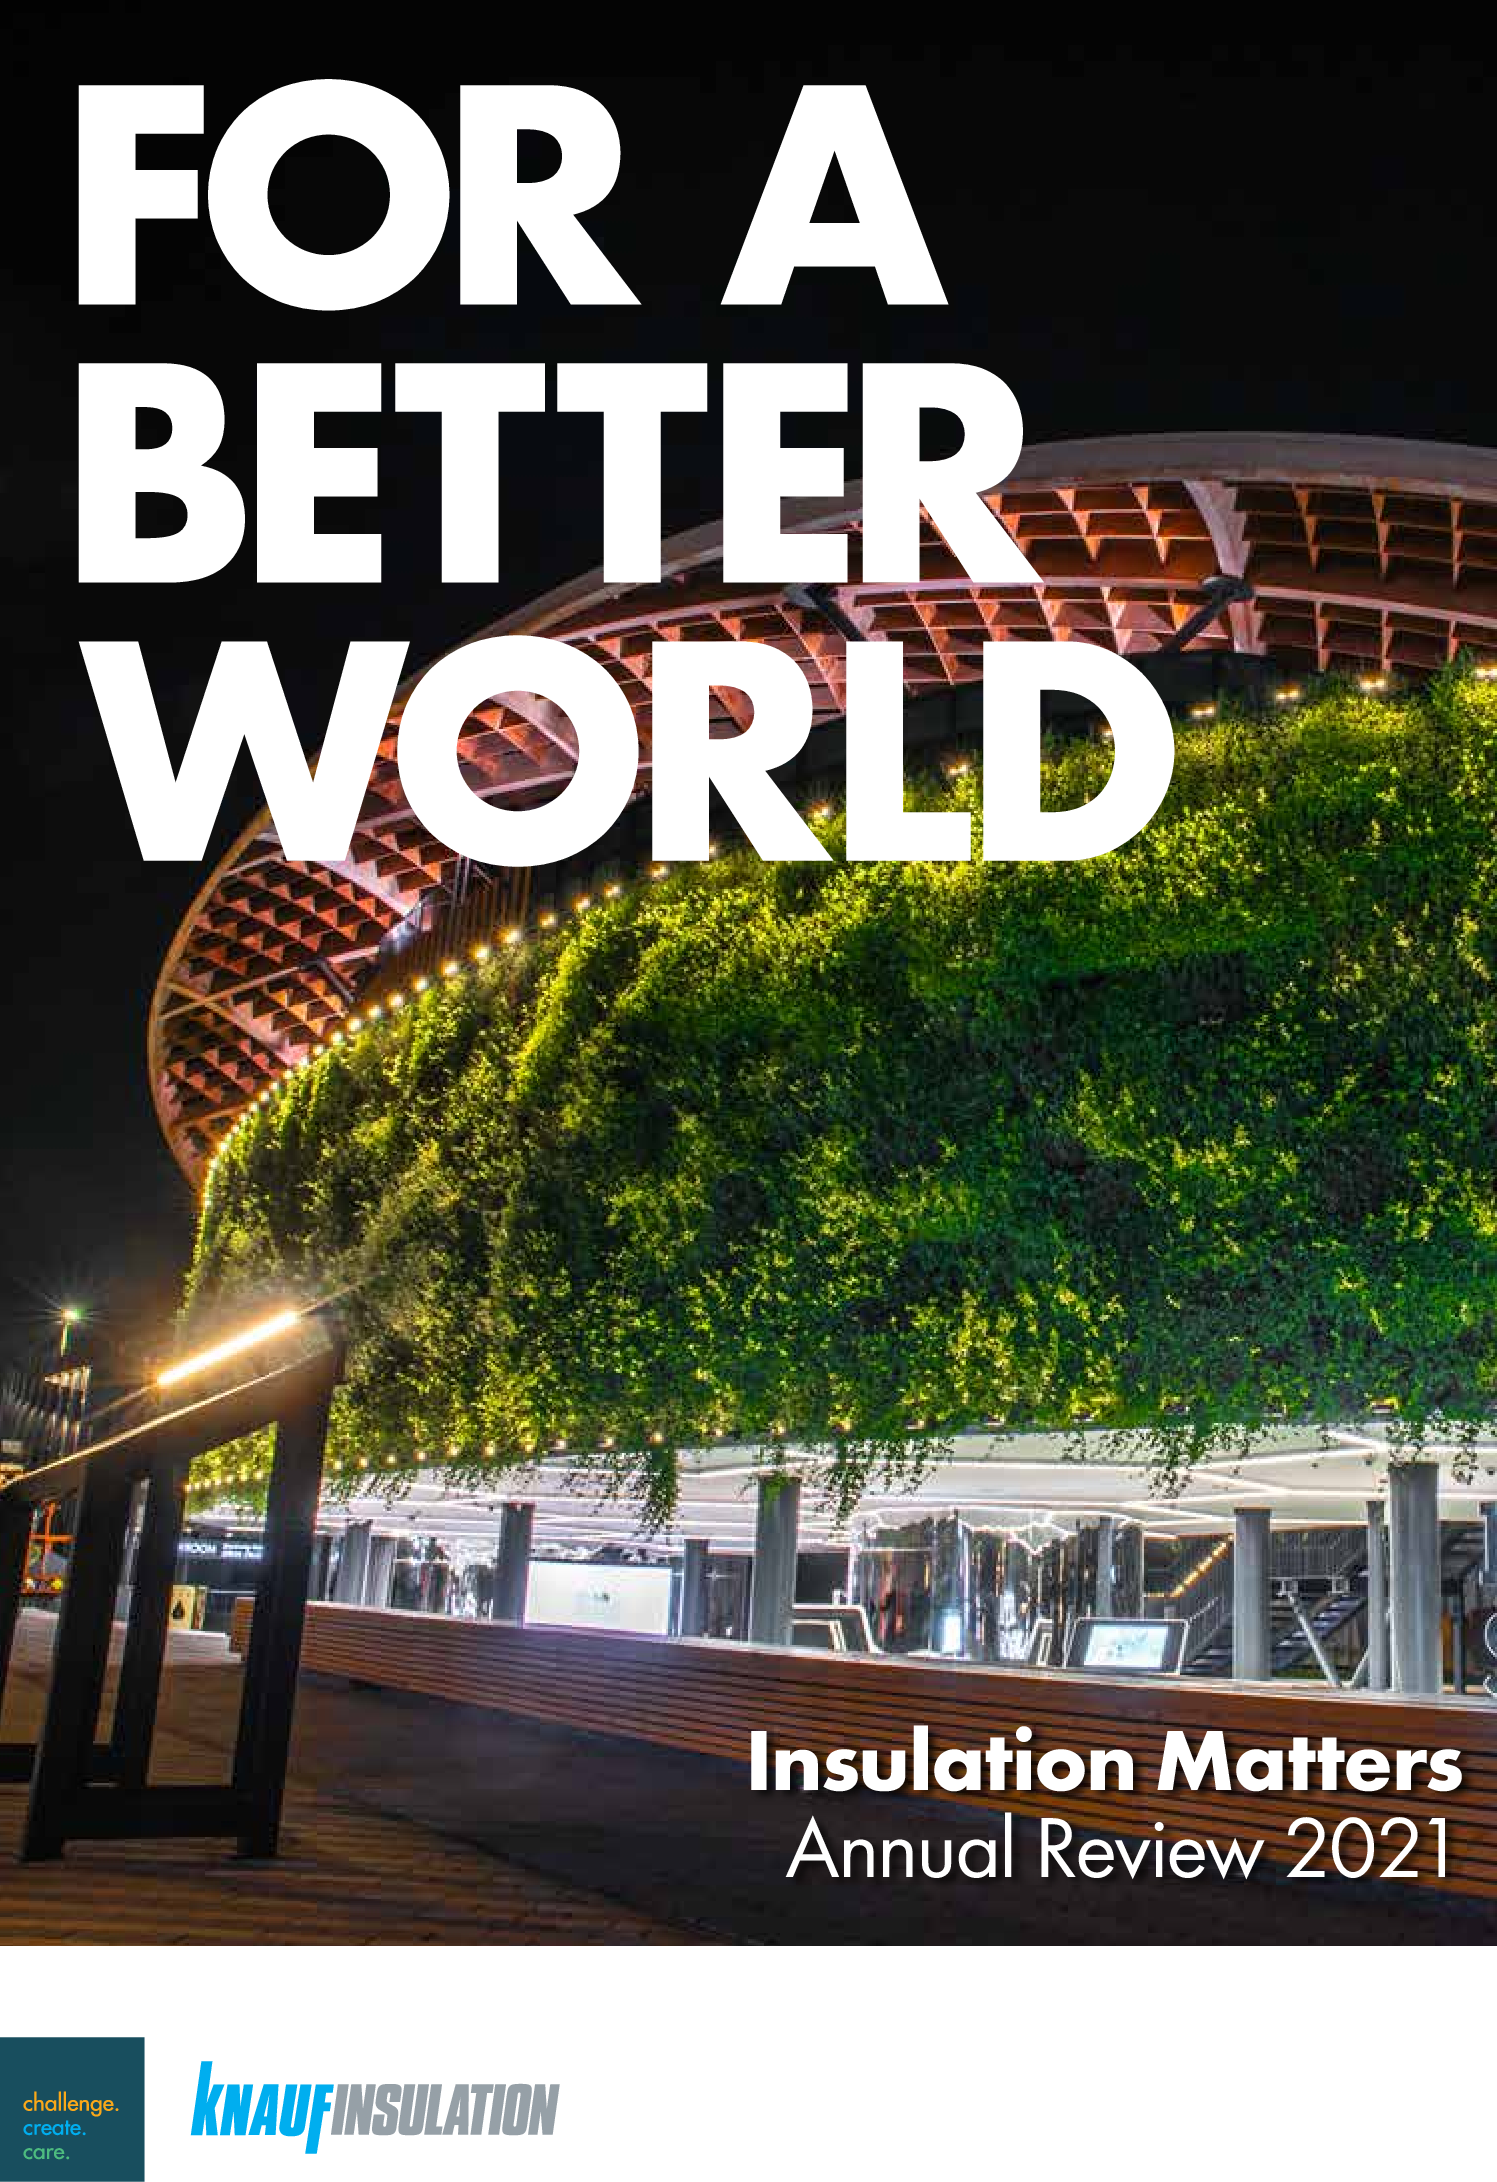 2021 - Informe Anual "Insulation Matters"